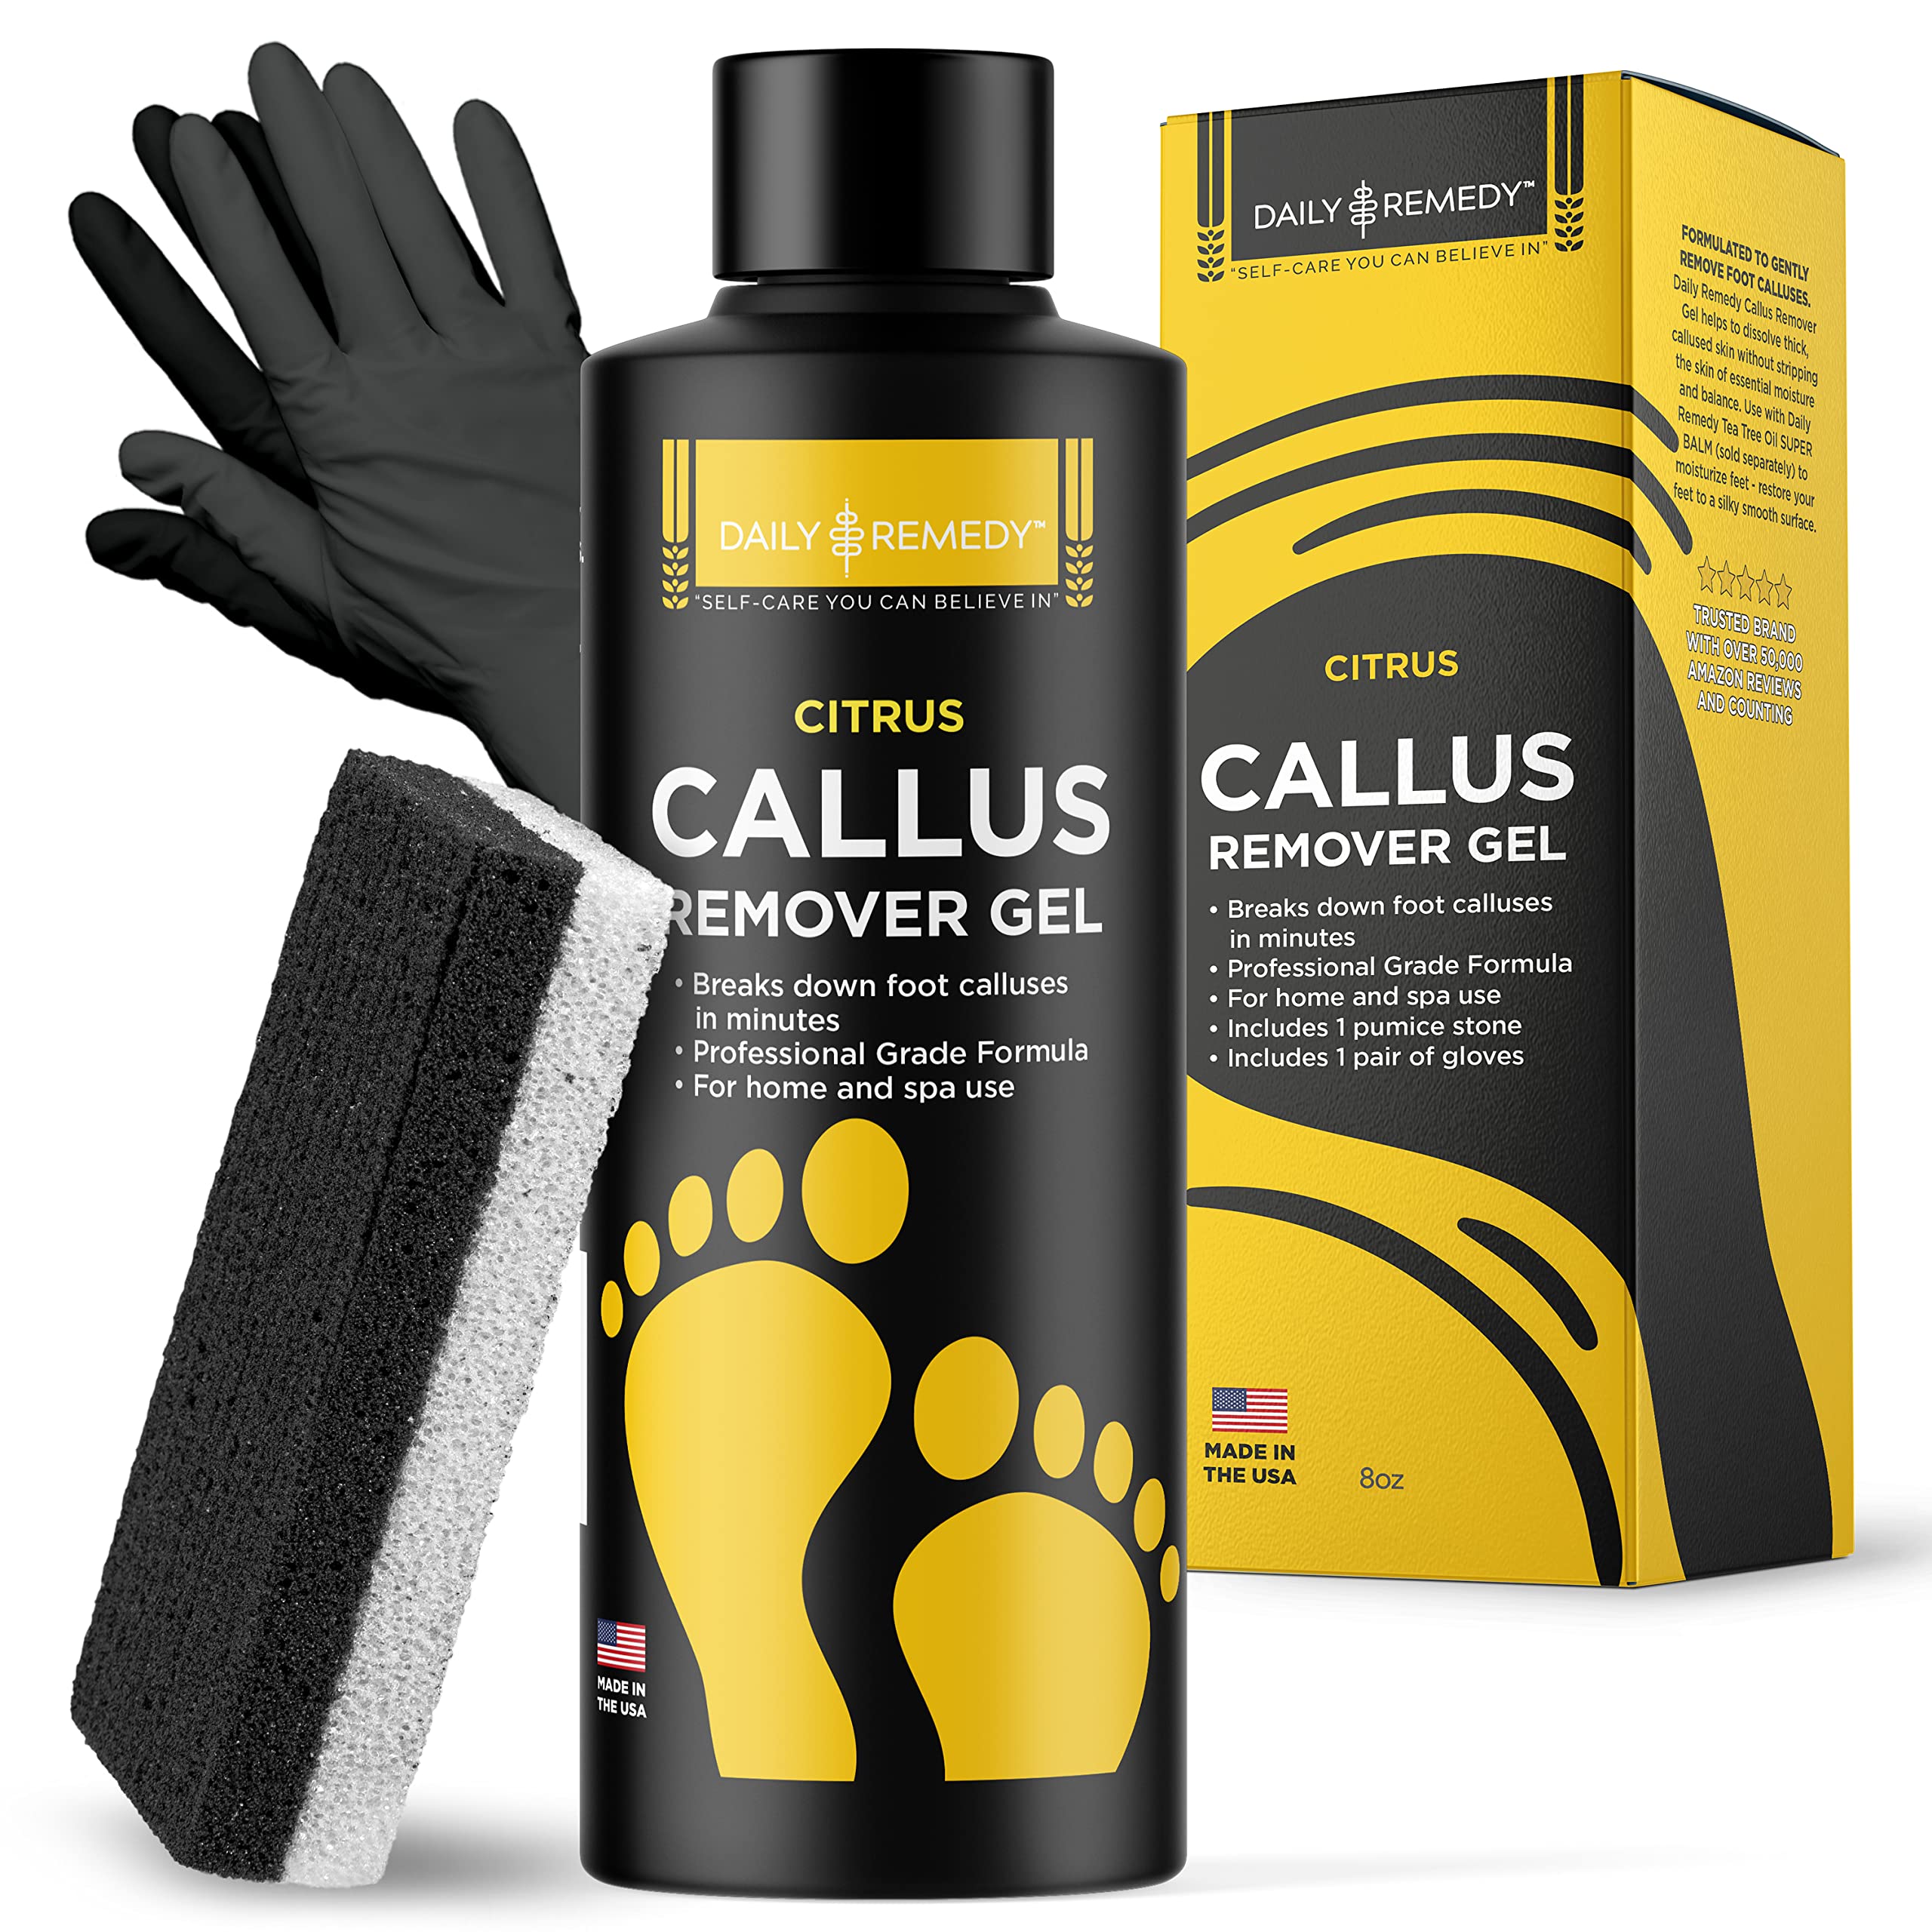 Essential Values Callus Remover gel for feet - pair with pumice stone